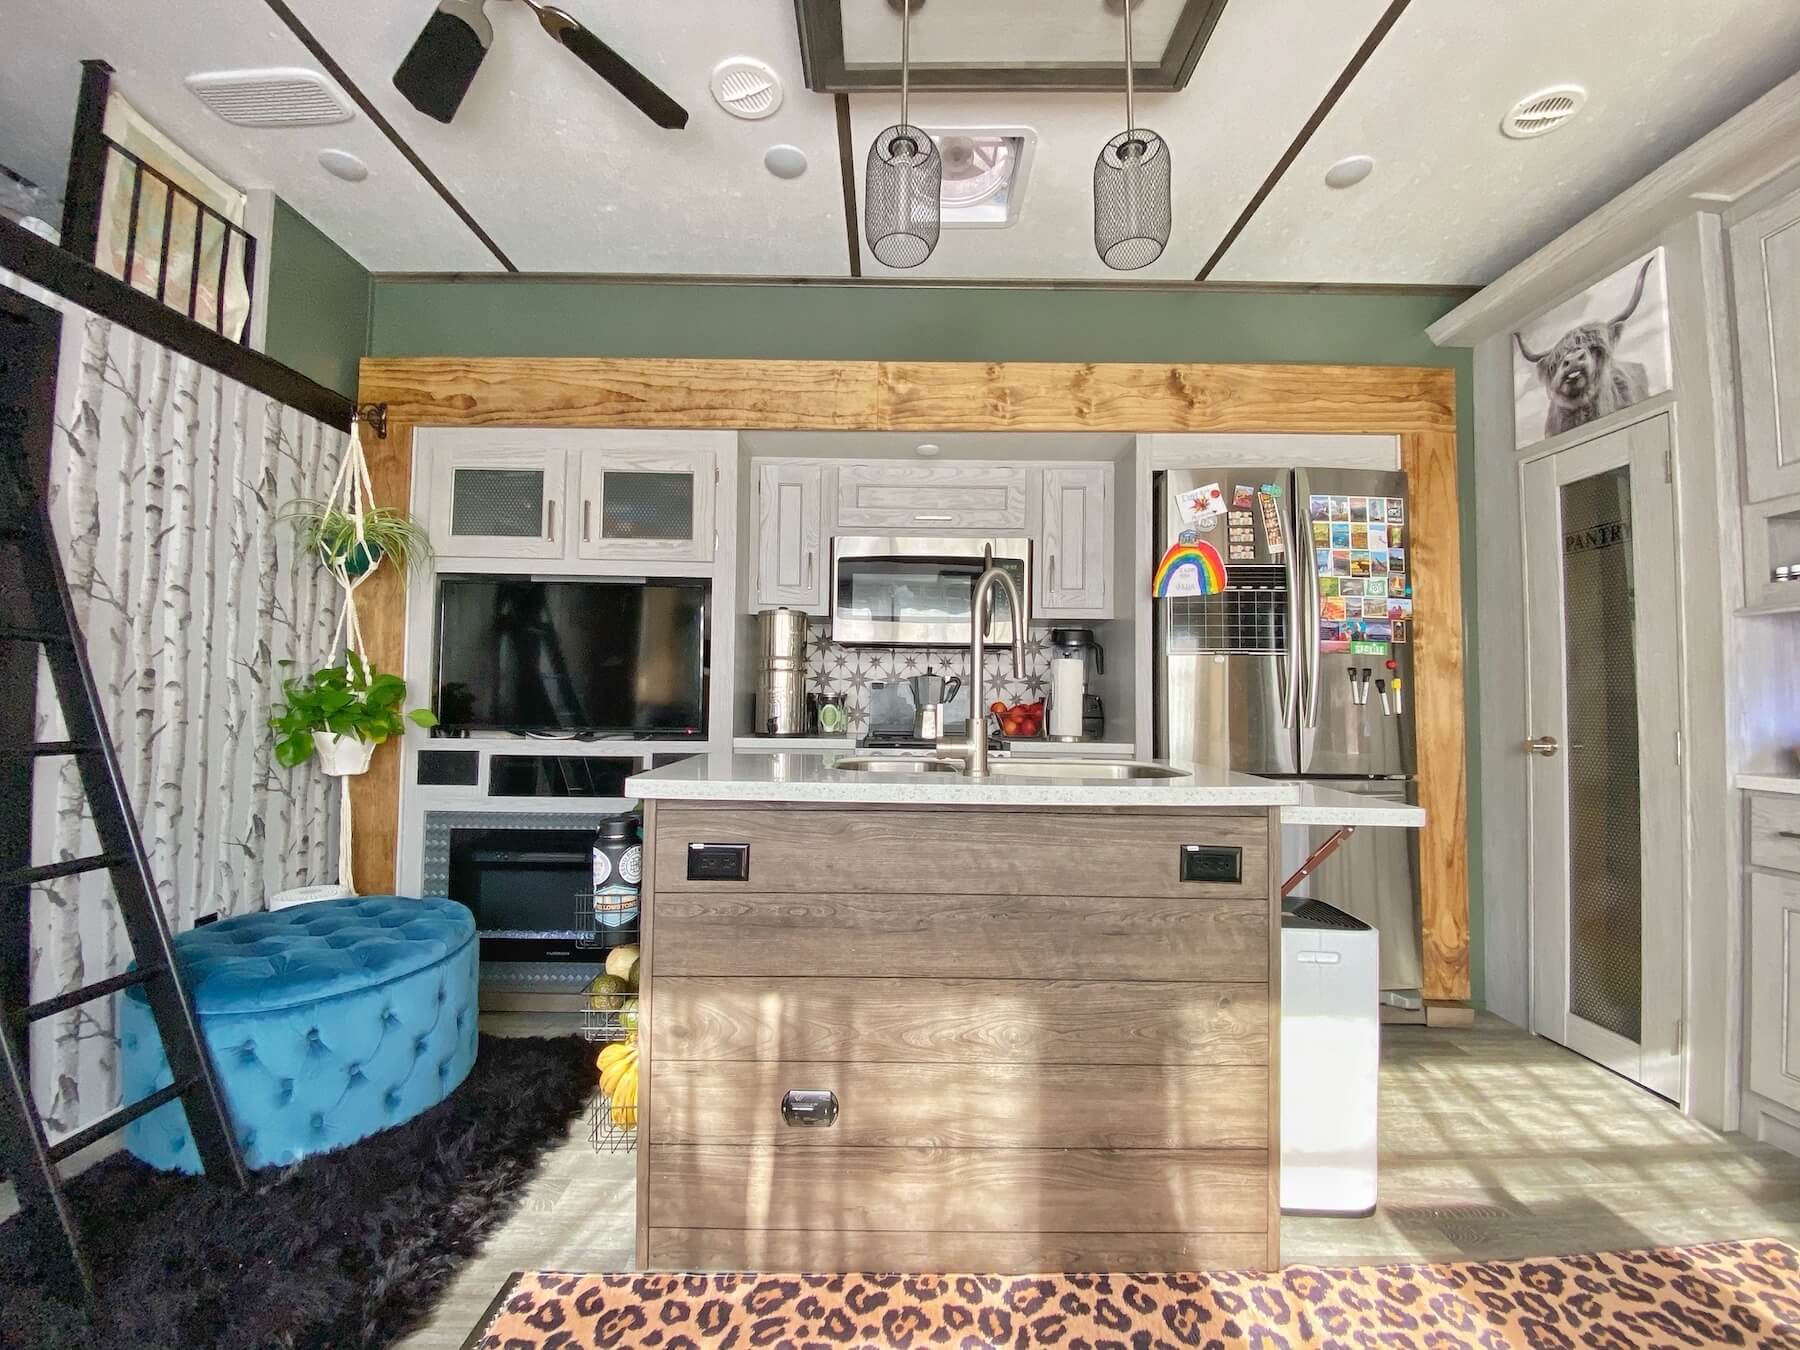 27 Ideas for Organizing and Saving Space in an RV Kitchen